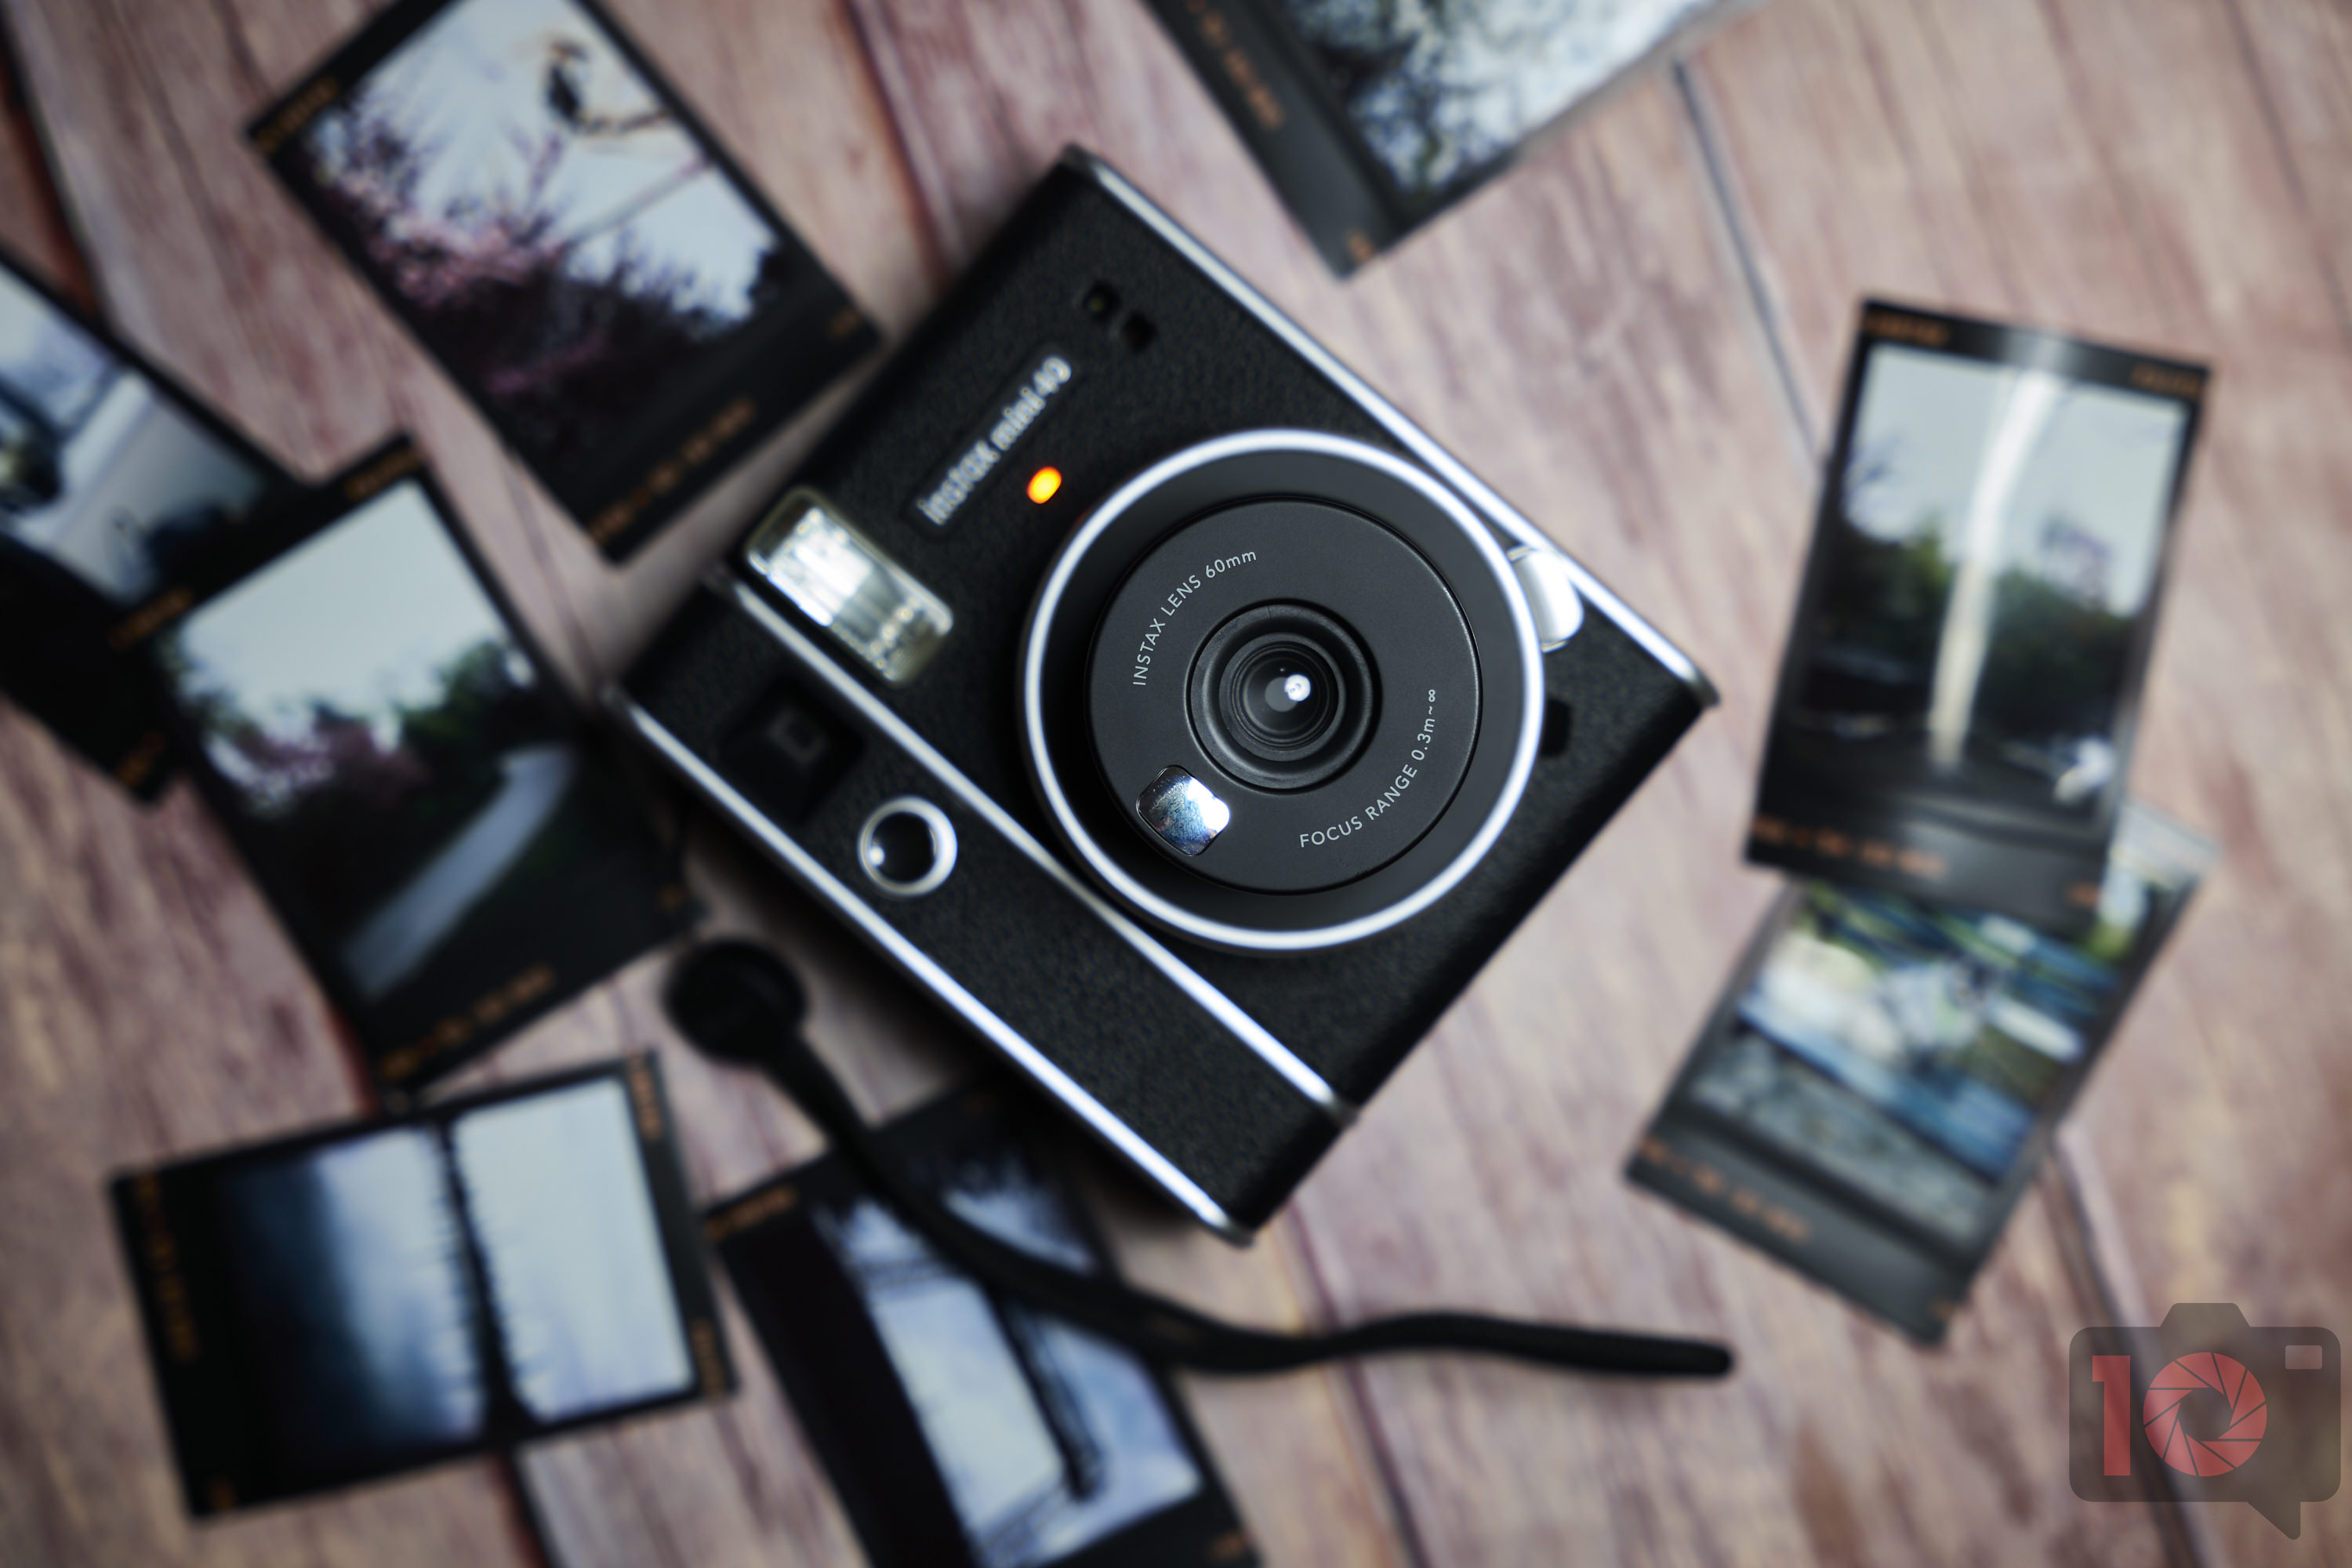 Chris Gampat The Phoblographer Fujifilm Instax Mini 40 review product images 2.81-100s200 10